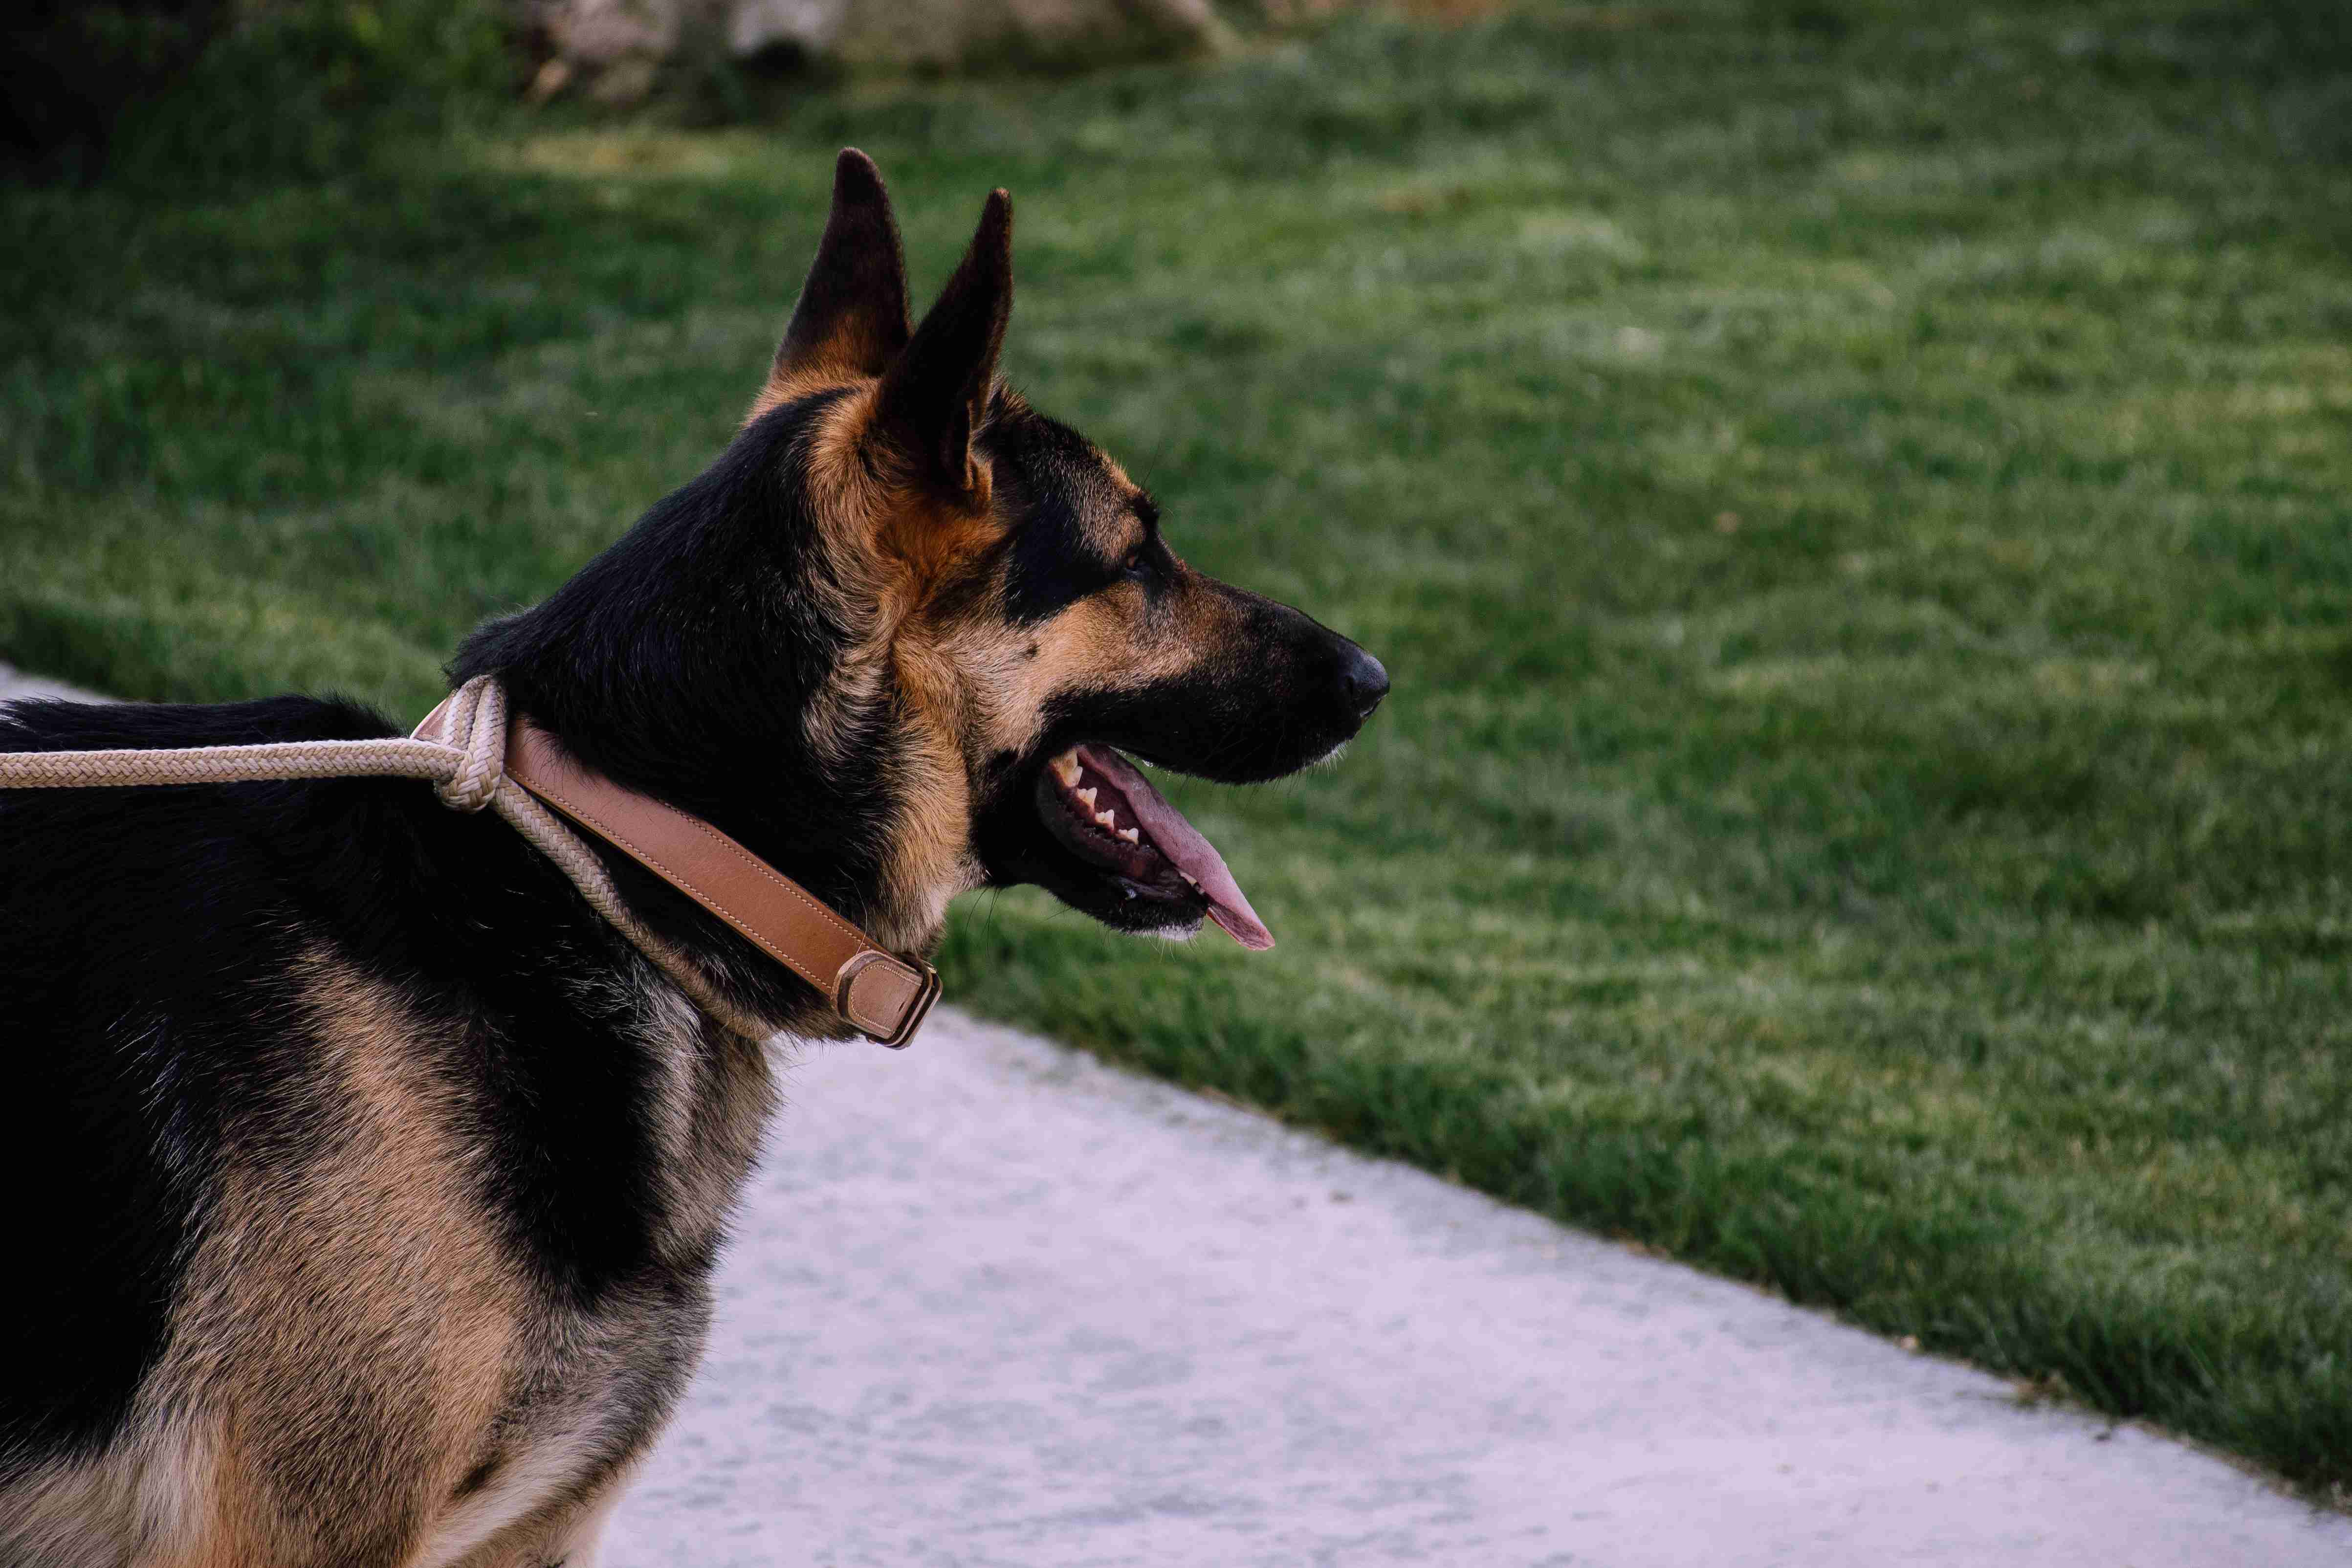 Can German Shepherds suffer from behavioral problems due to health issues?